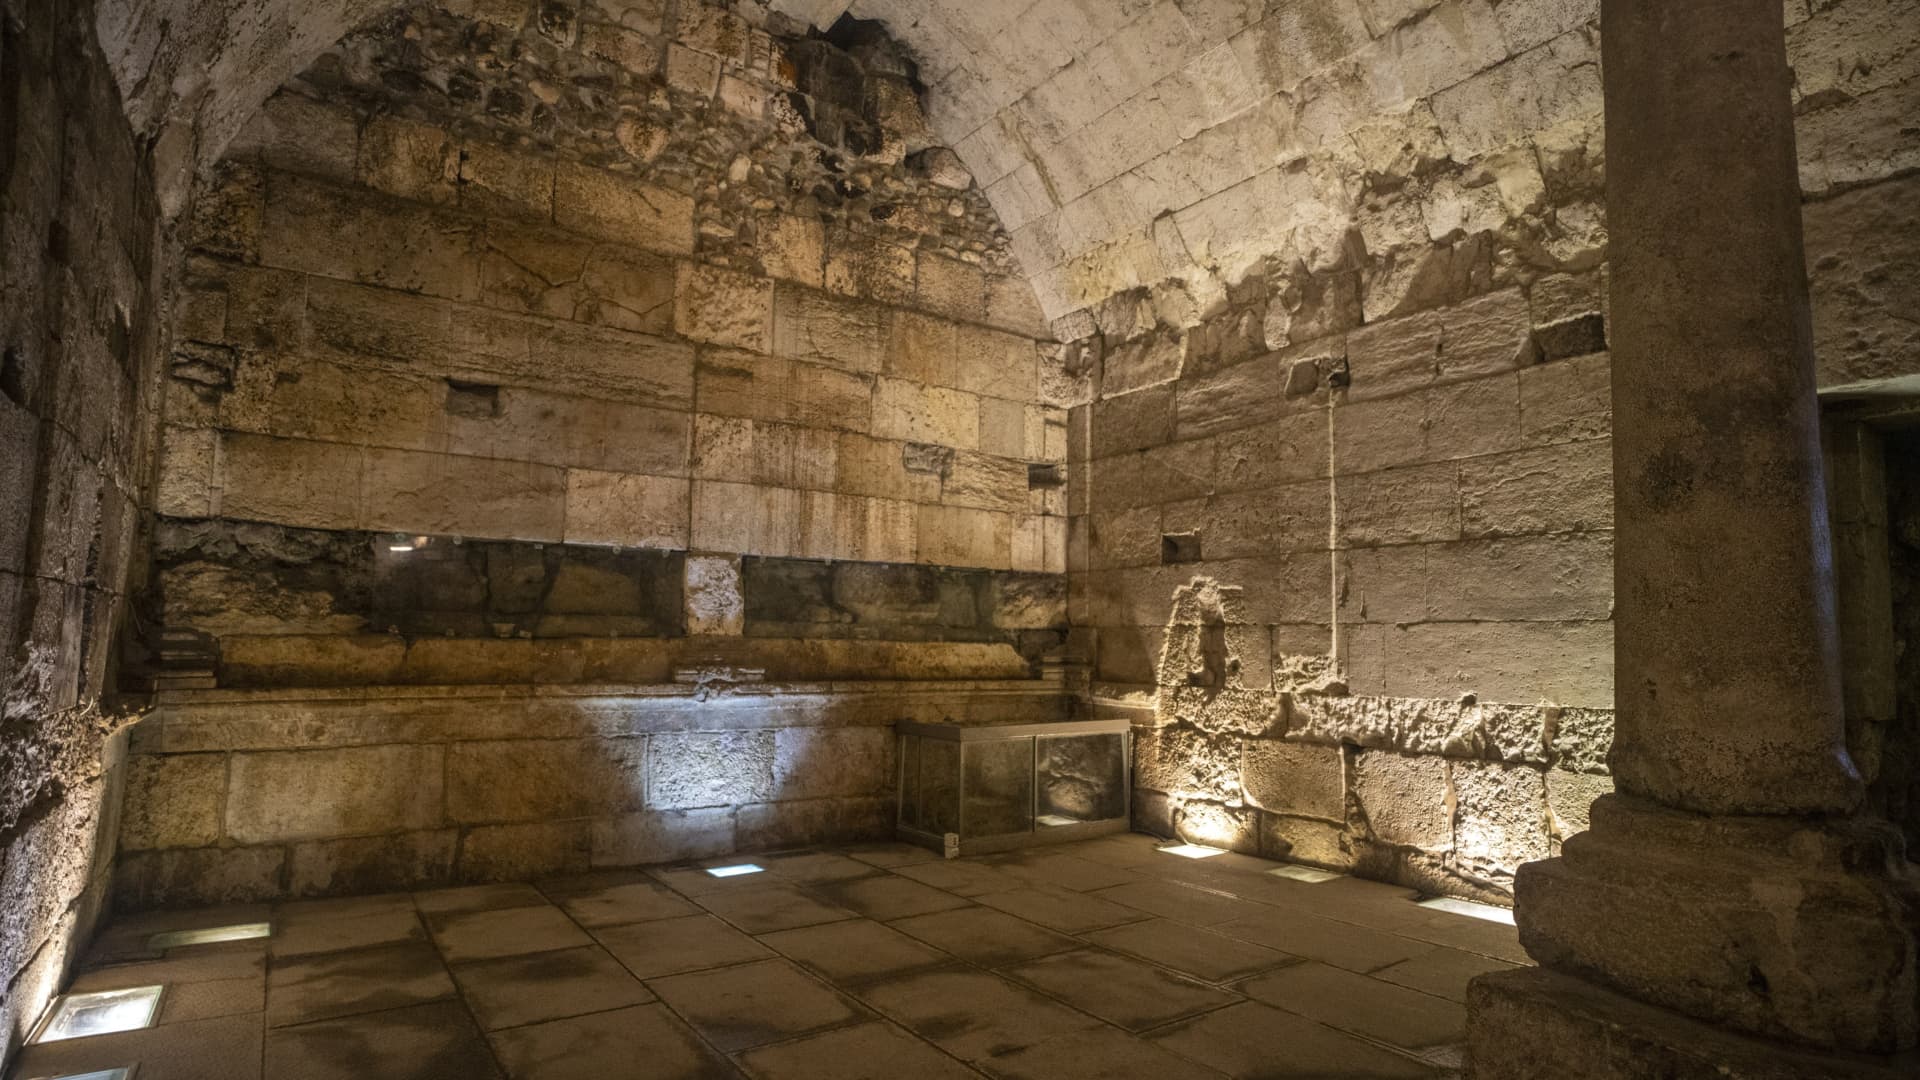 The second excavated chamber, which is constructed using arched stone ceilings.